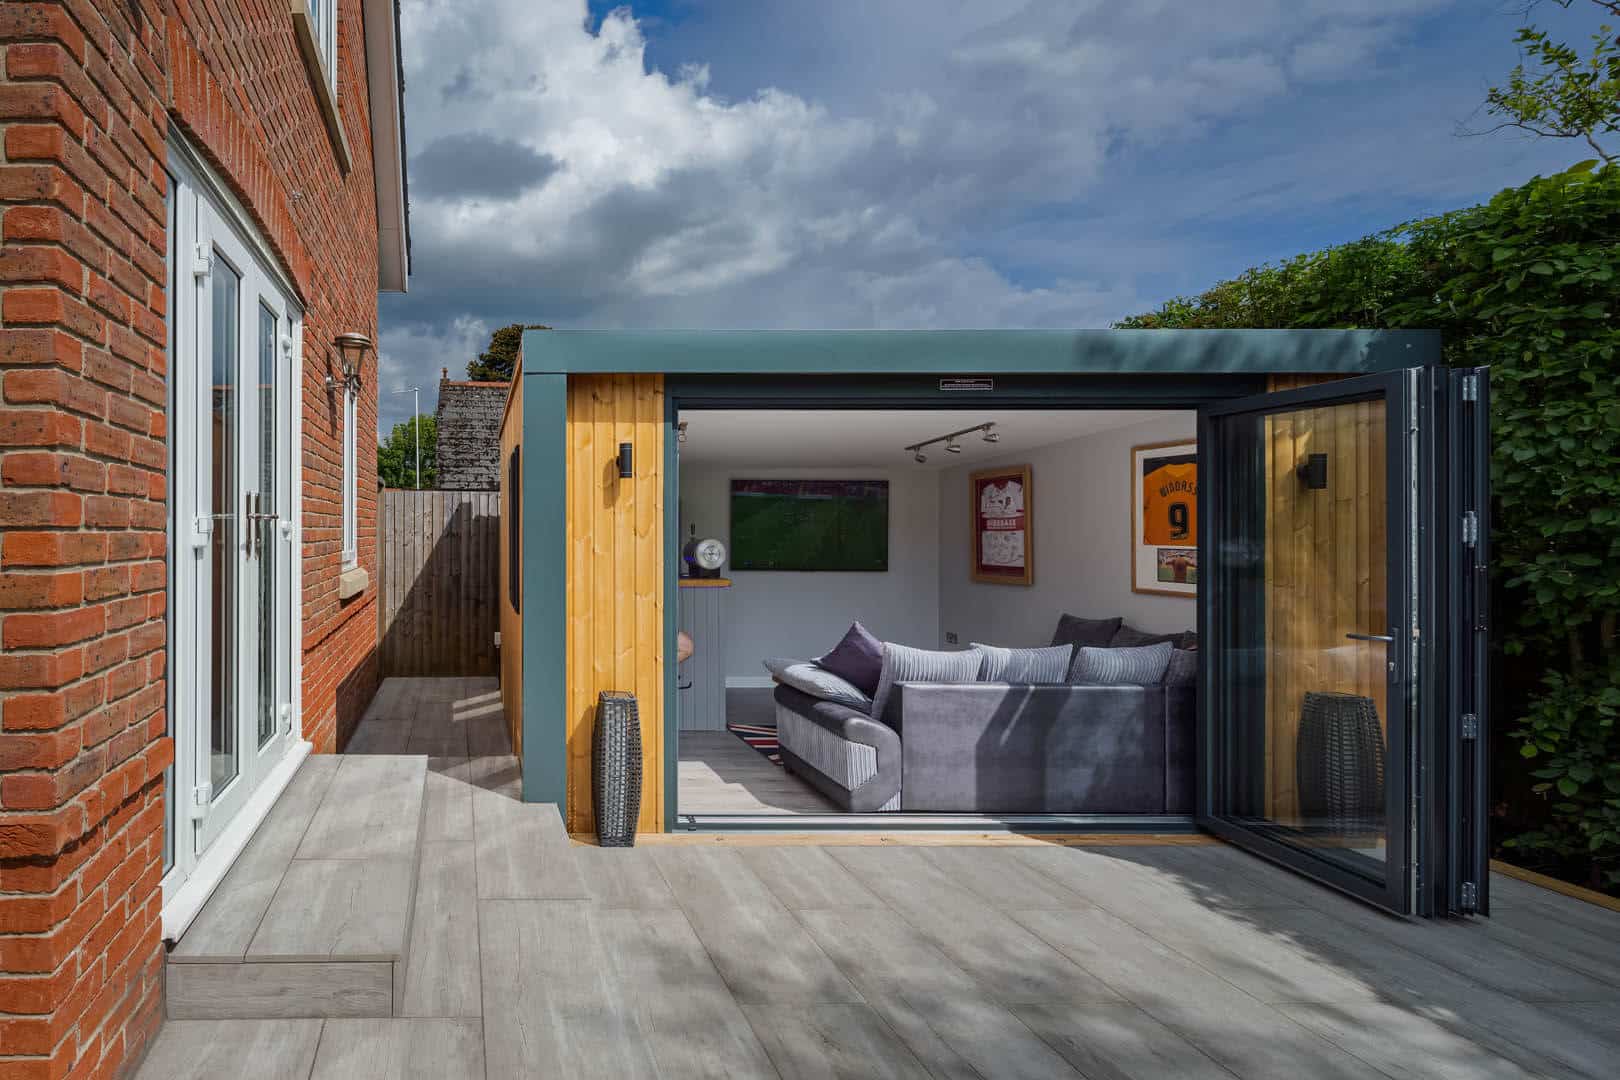 Exterior of a man cave on a patio. The bi-fold doors are open looking into the man cave with a grey L shaped sofa and TV mounted to the wall